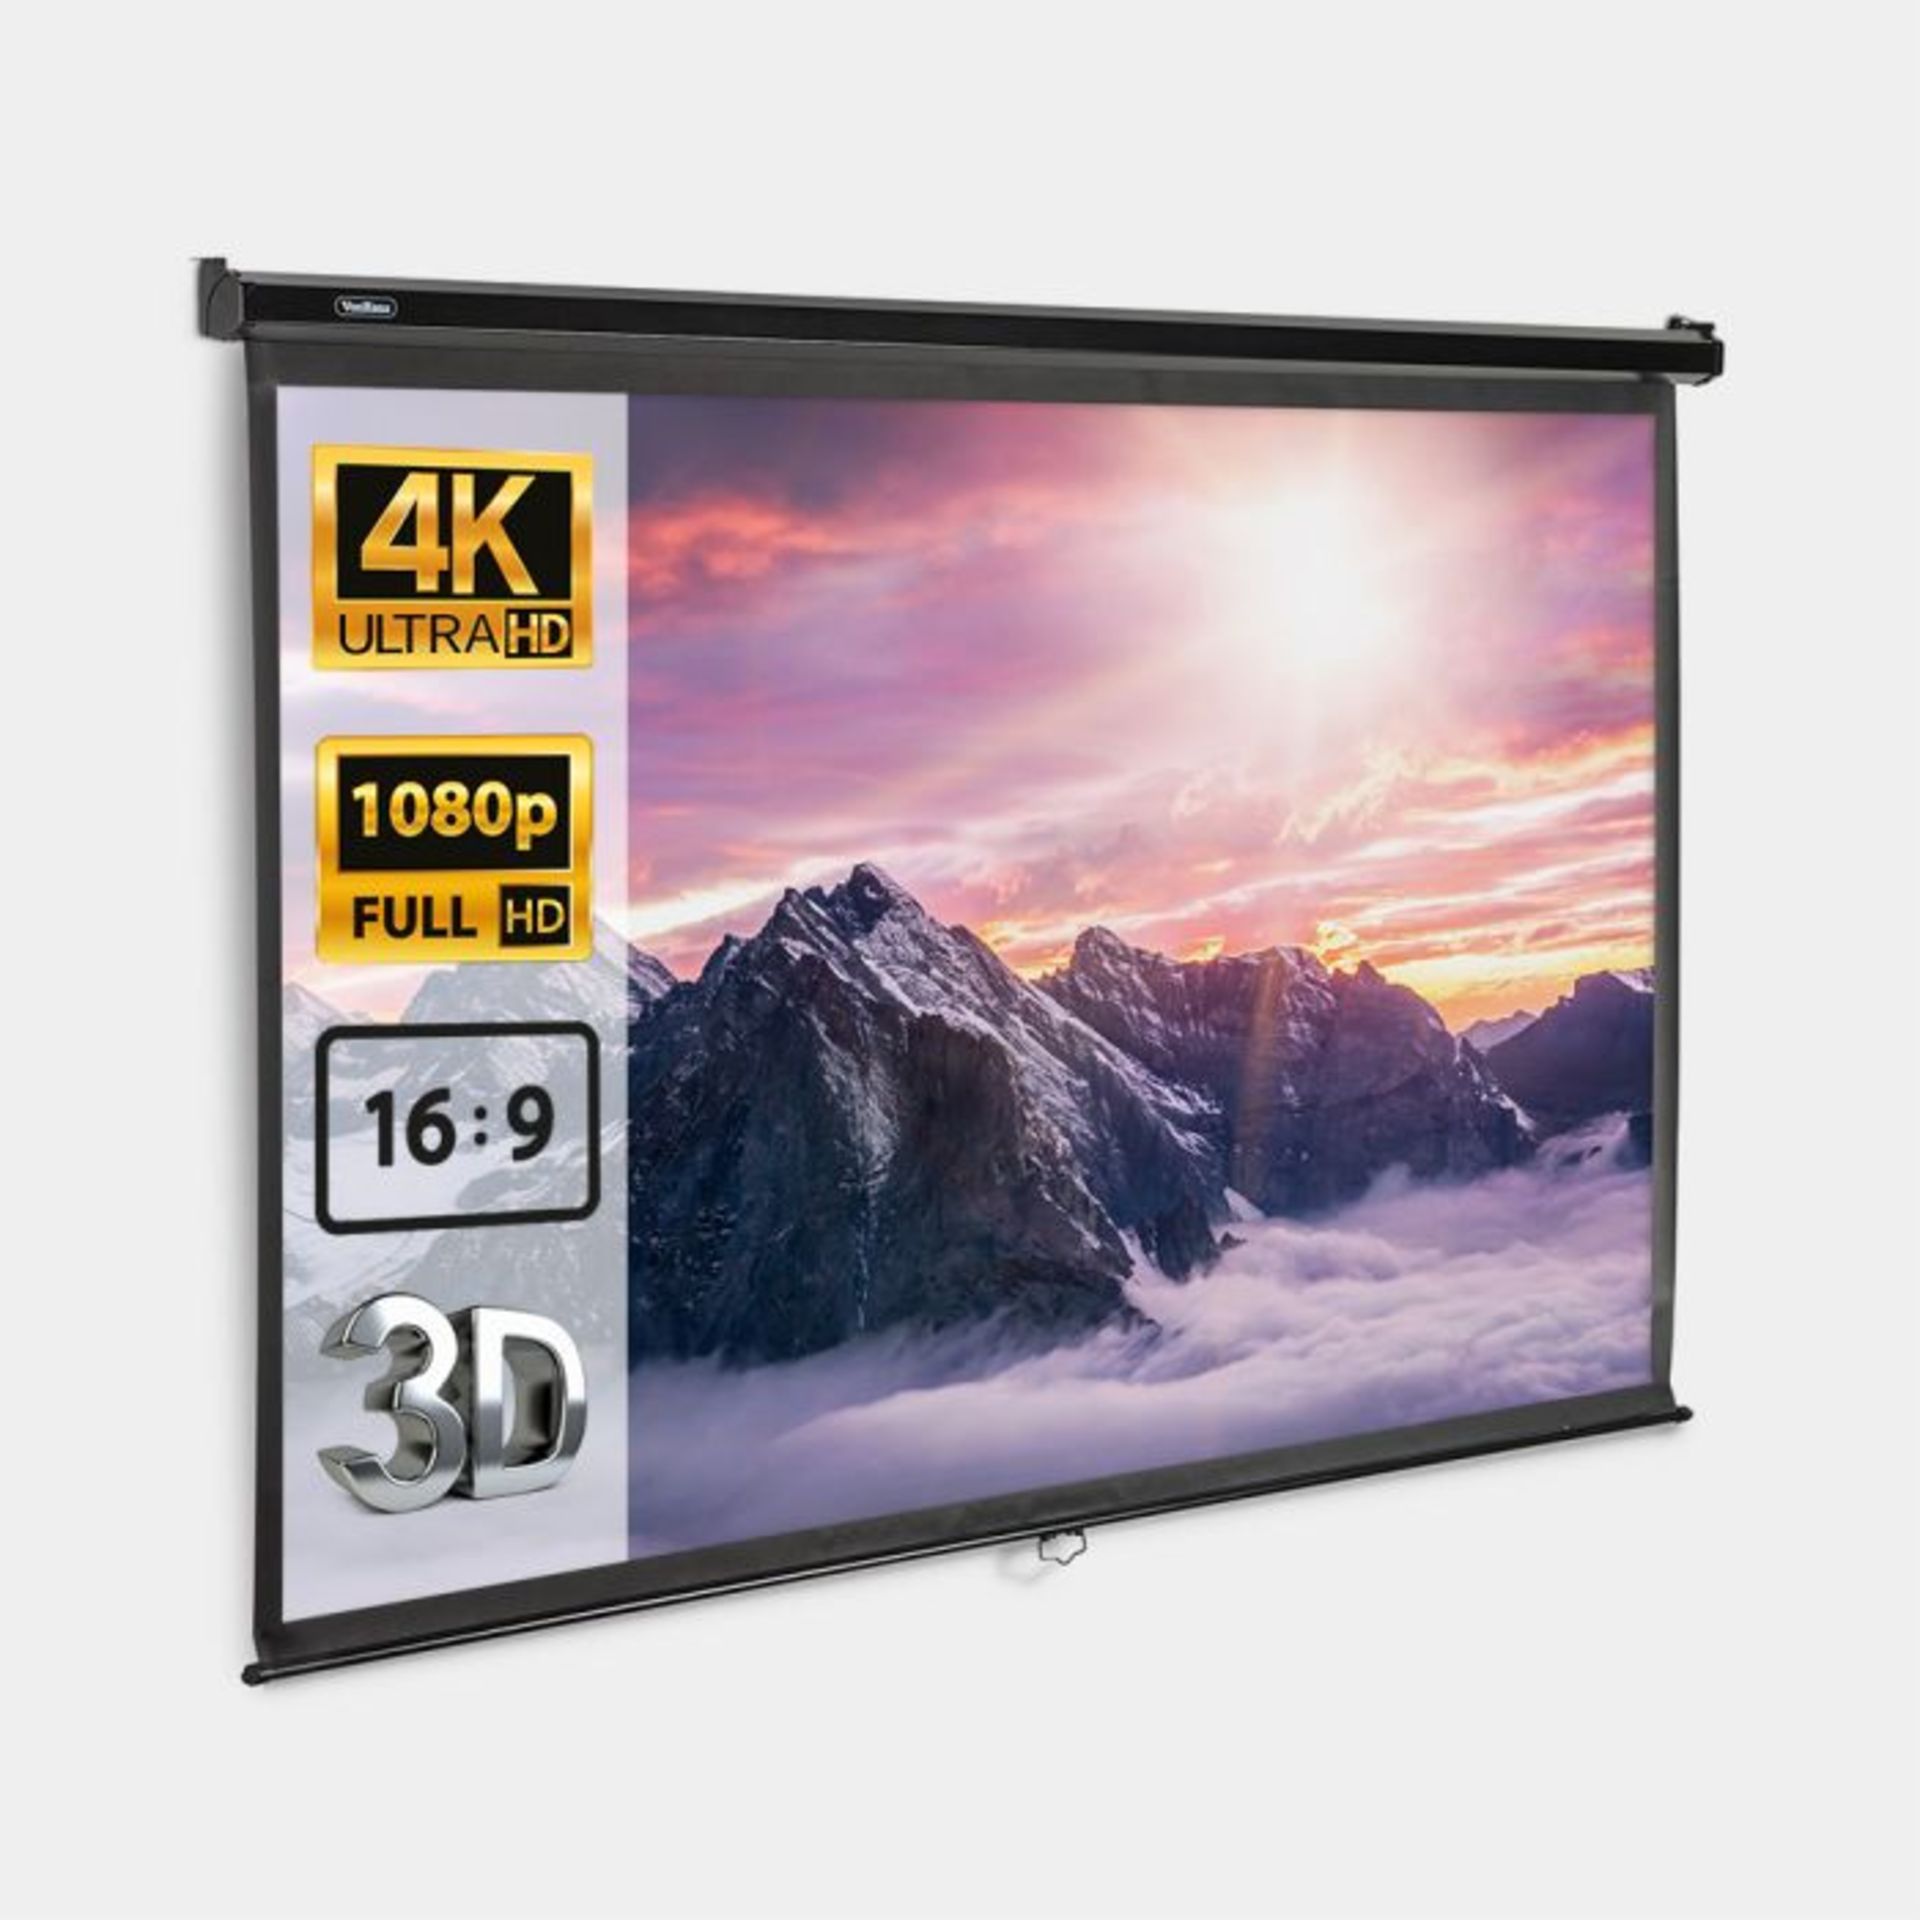 2 x 80-Inch Pull-Down Projector Screen. - ER51. RRP £119.99. Simple to install, easy to operate